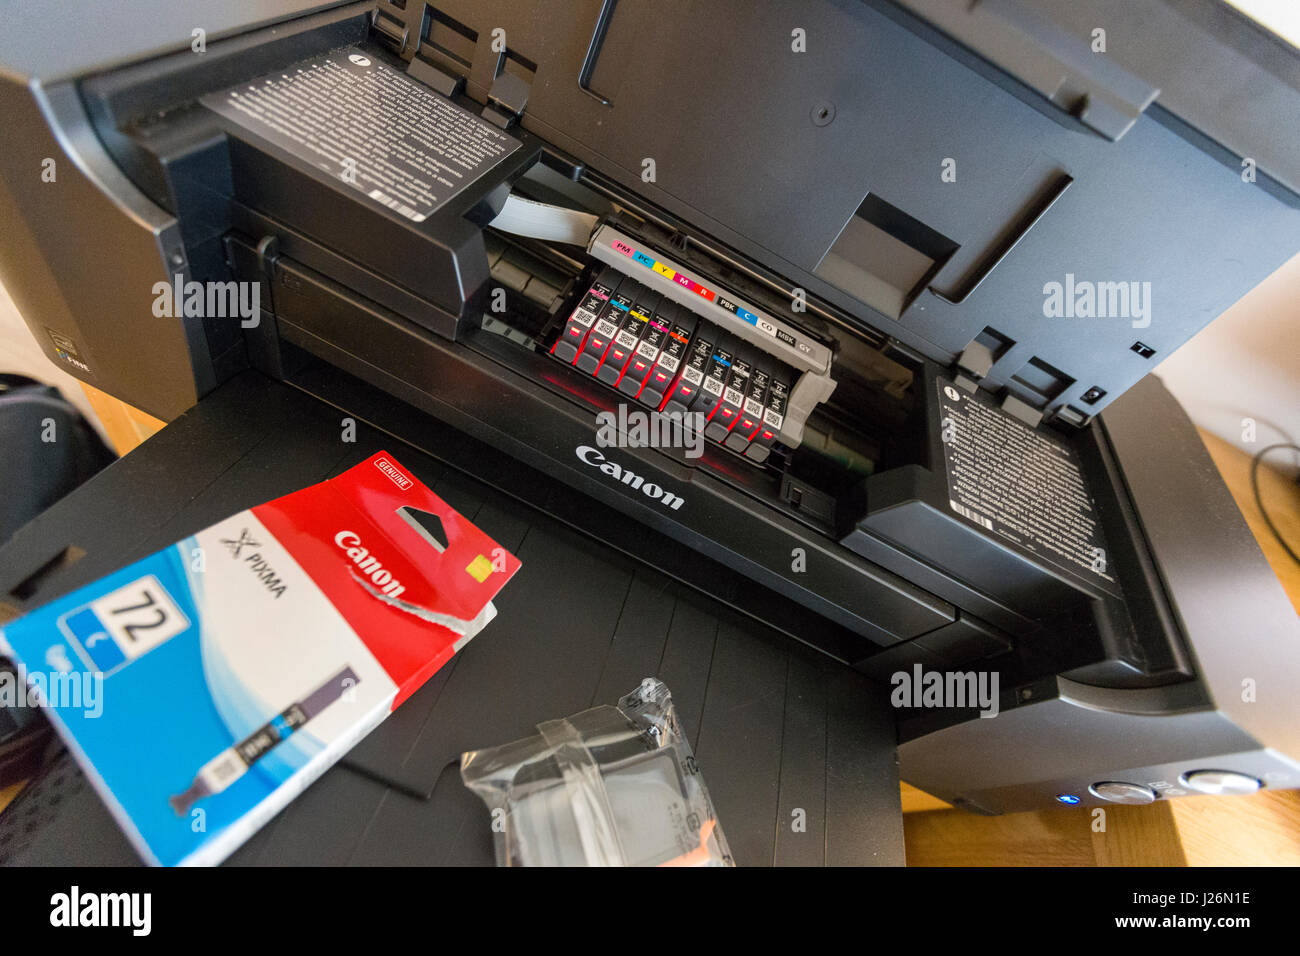 Replacing printer ink cartridge on Canon Pixma Pro-10 Model Release: No.  Property Release: No Stock Photo - Alamy